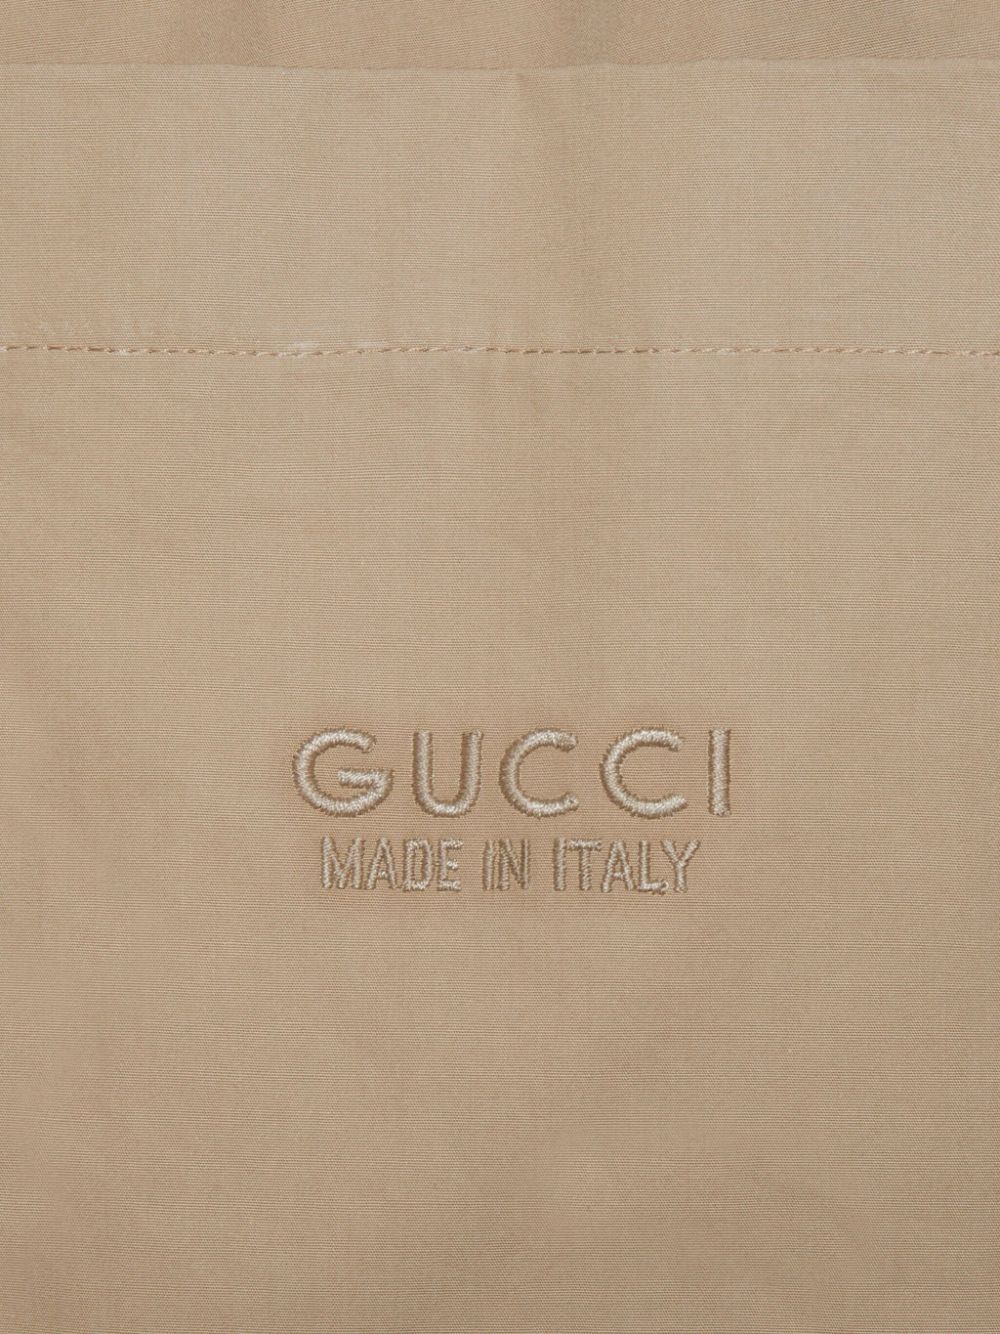 GUCCI Men's Beige Cotton Pants with Embroidered Logo and Elasticated Waistband